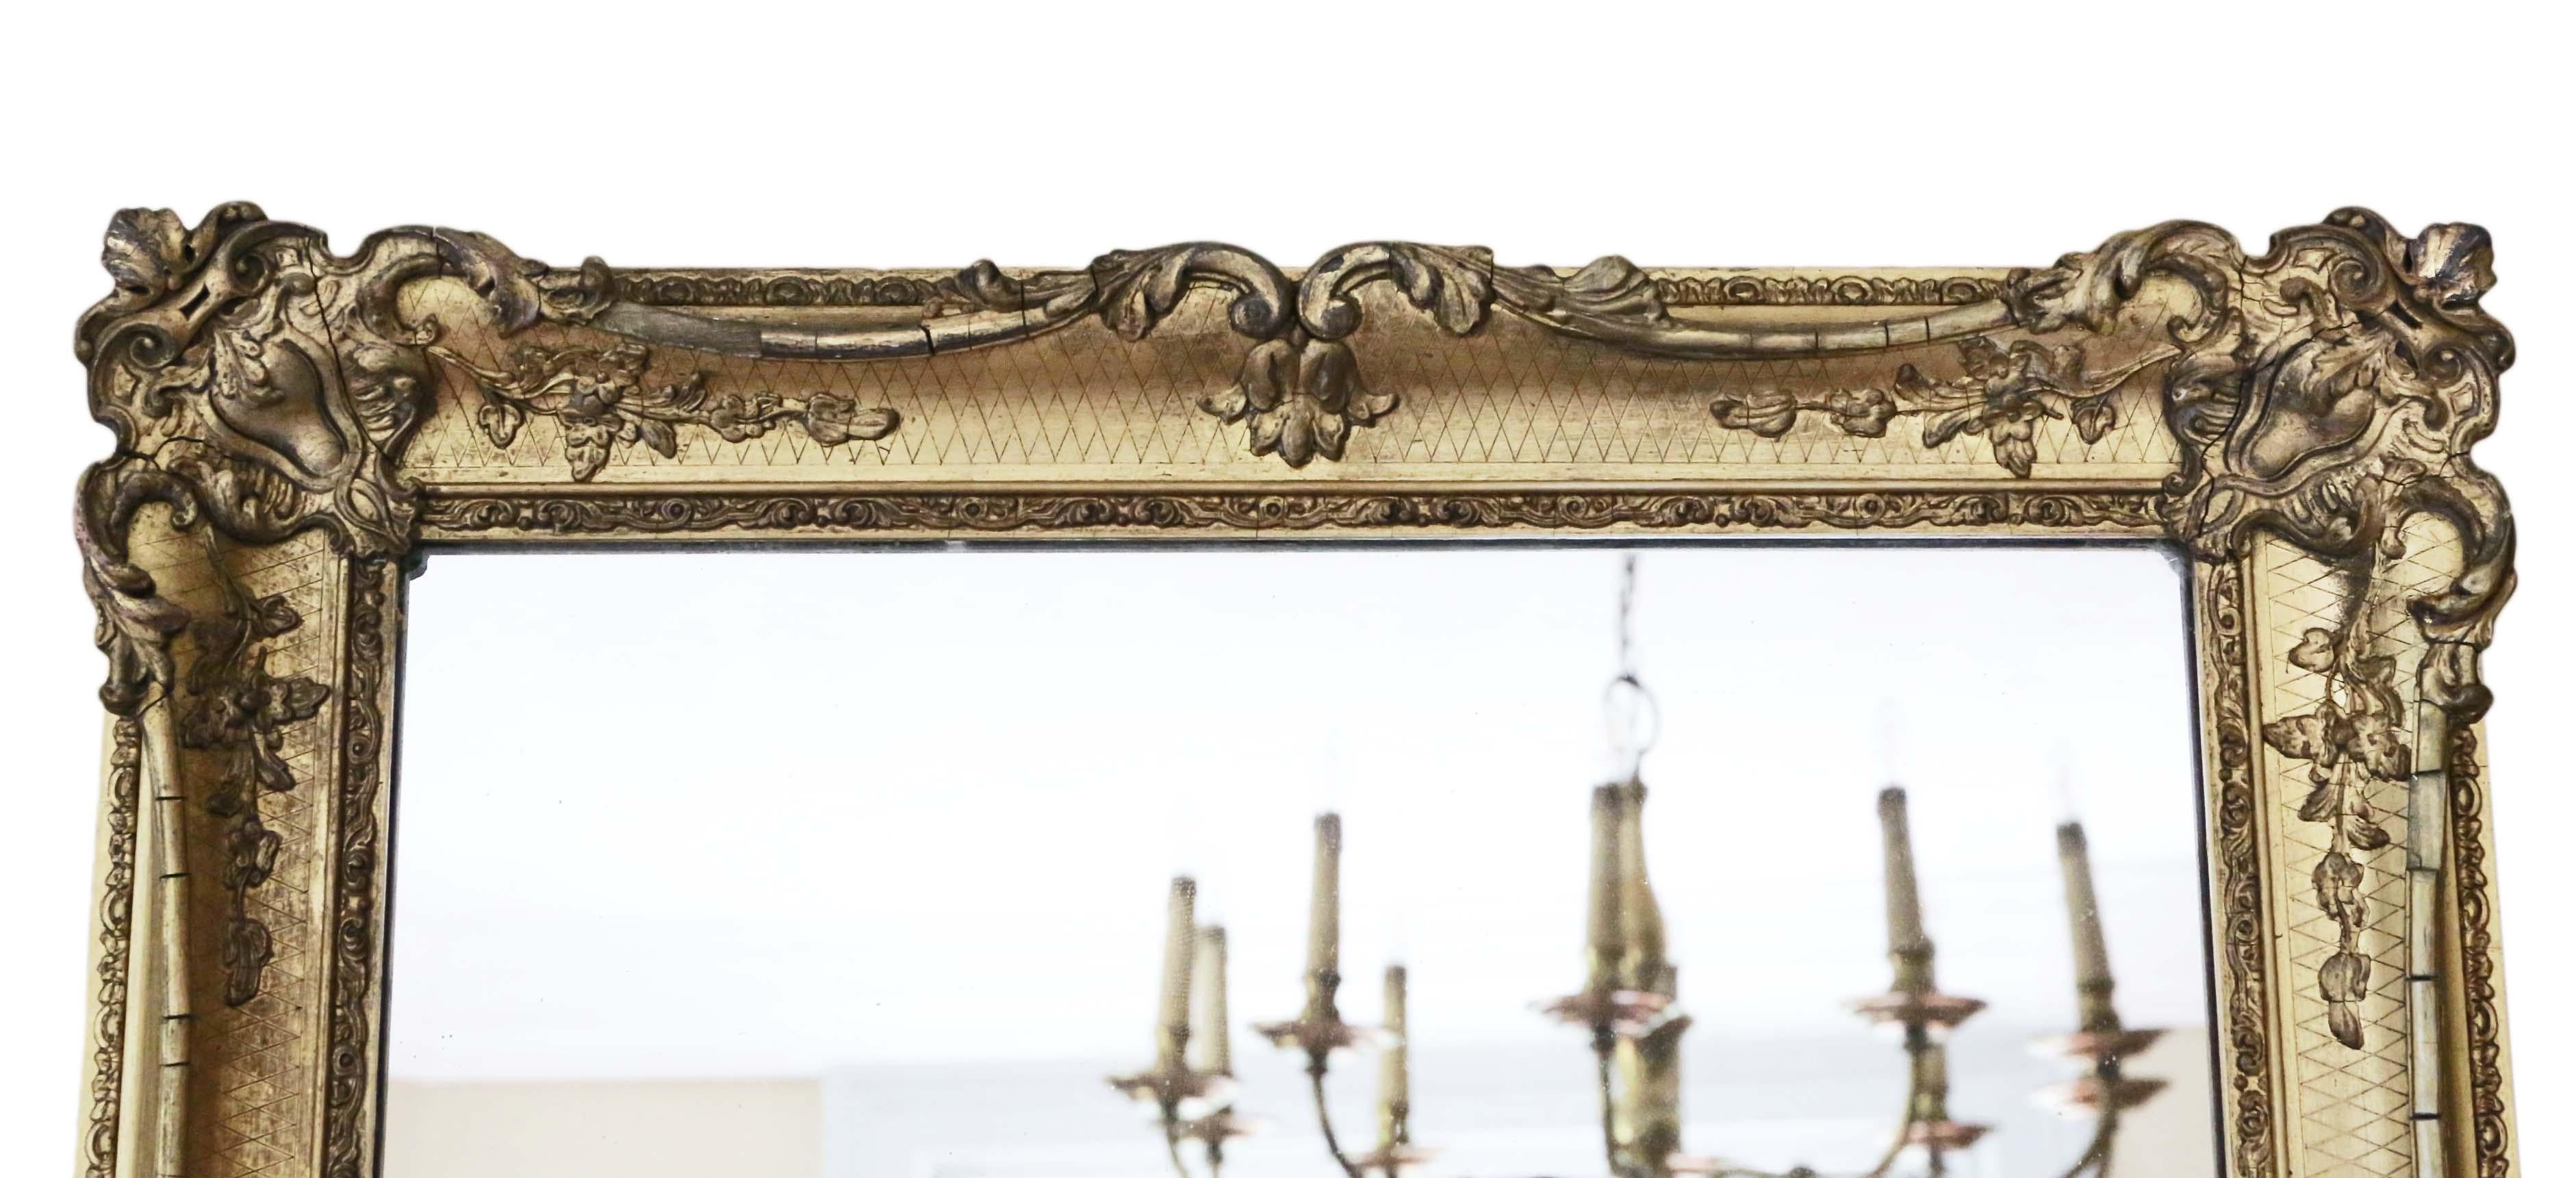 Antique charming pair of large quality gilt wall or overmantle mirrors, 19th Century. Could be hung in portrait or landscape.

An impressive find, that would look amazing in the right location. No loose joints or woodworm.

The mirrored glass